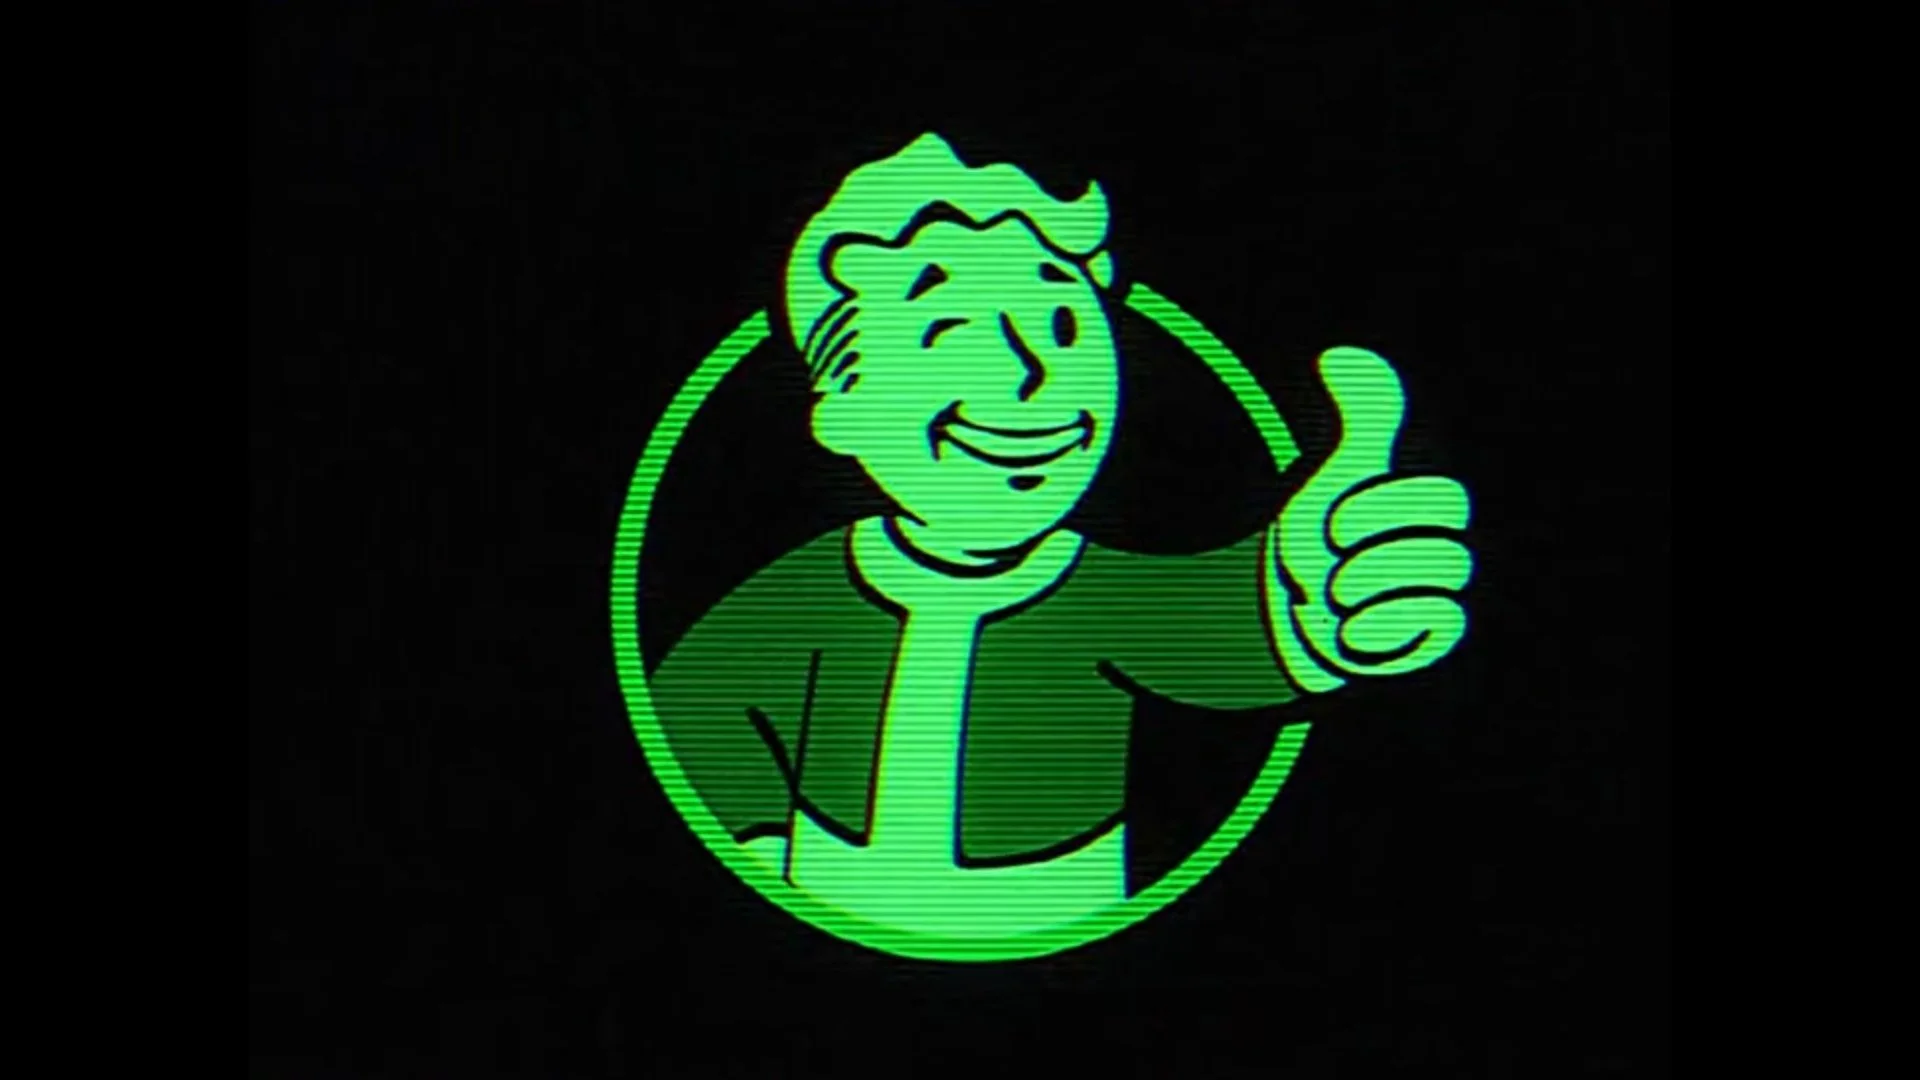 The release date for the Fallout series has been announced